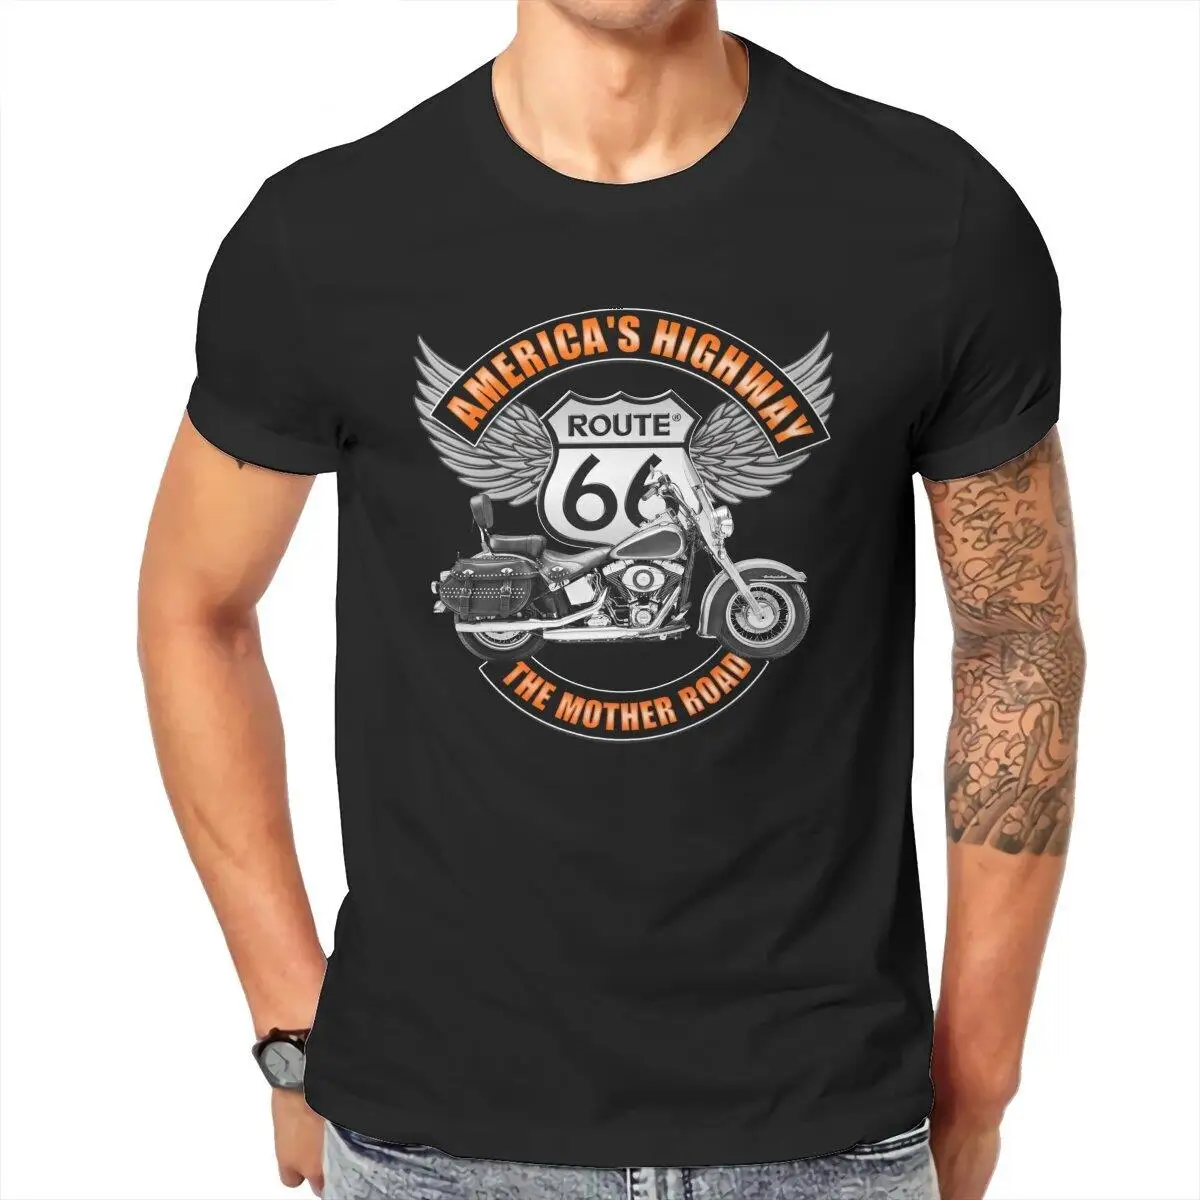 Americas Highway  T-Shirts Men Route 66 Motorcycles Vintage Pure Cotton Tee Shirt O Neck Short Sleeve T Shirts Plus Size Tops